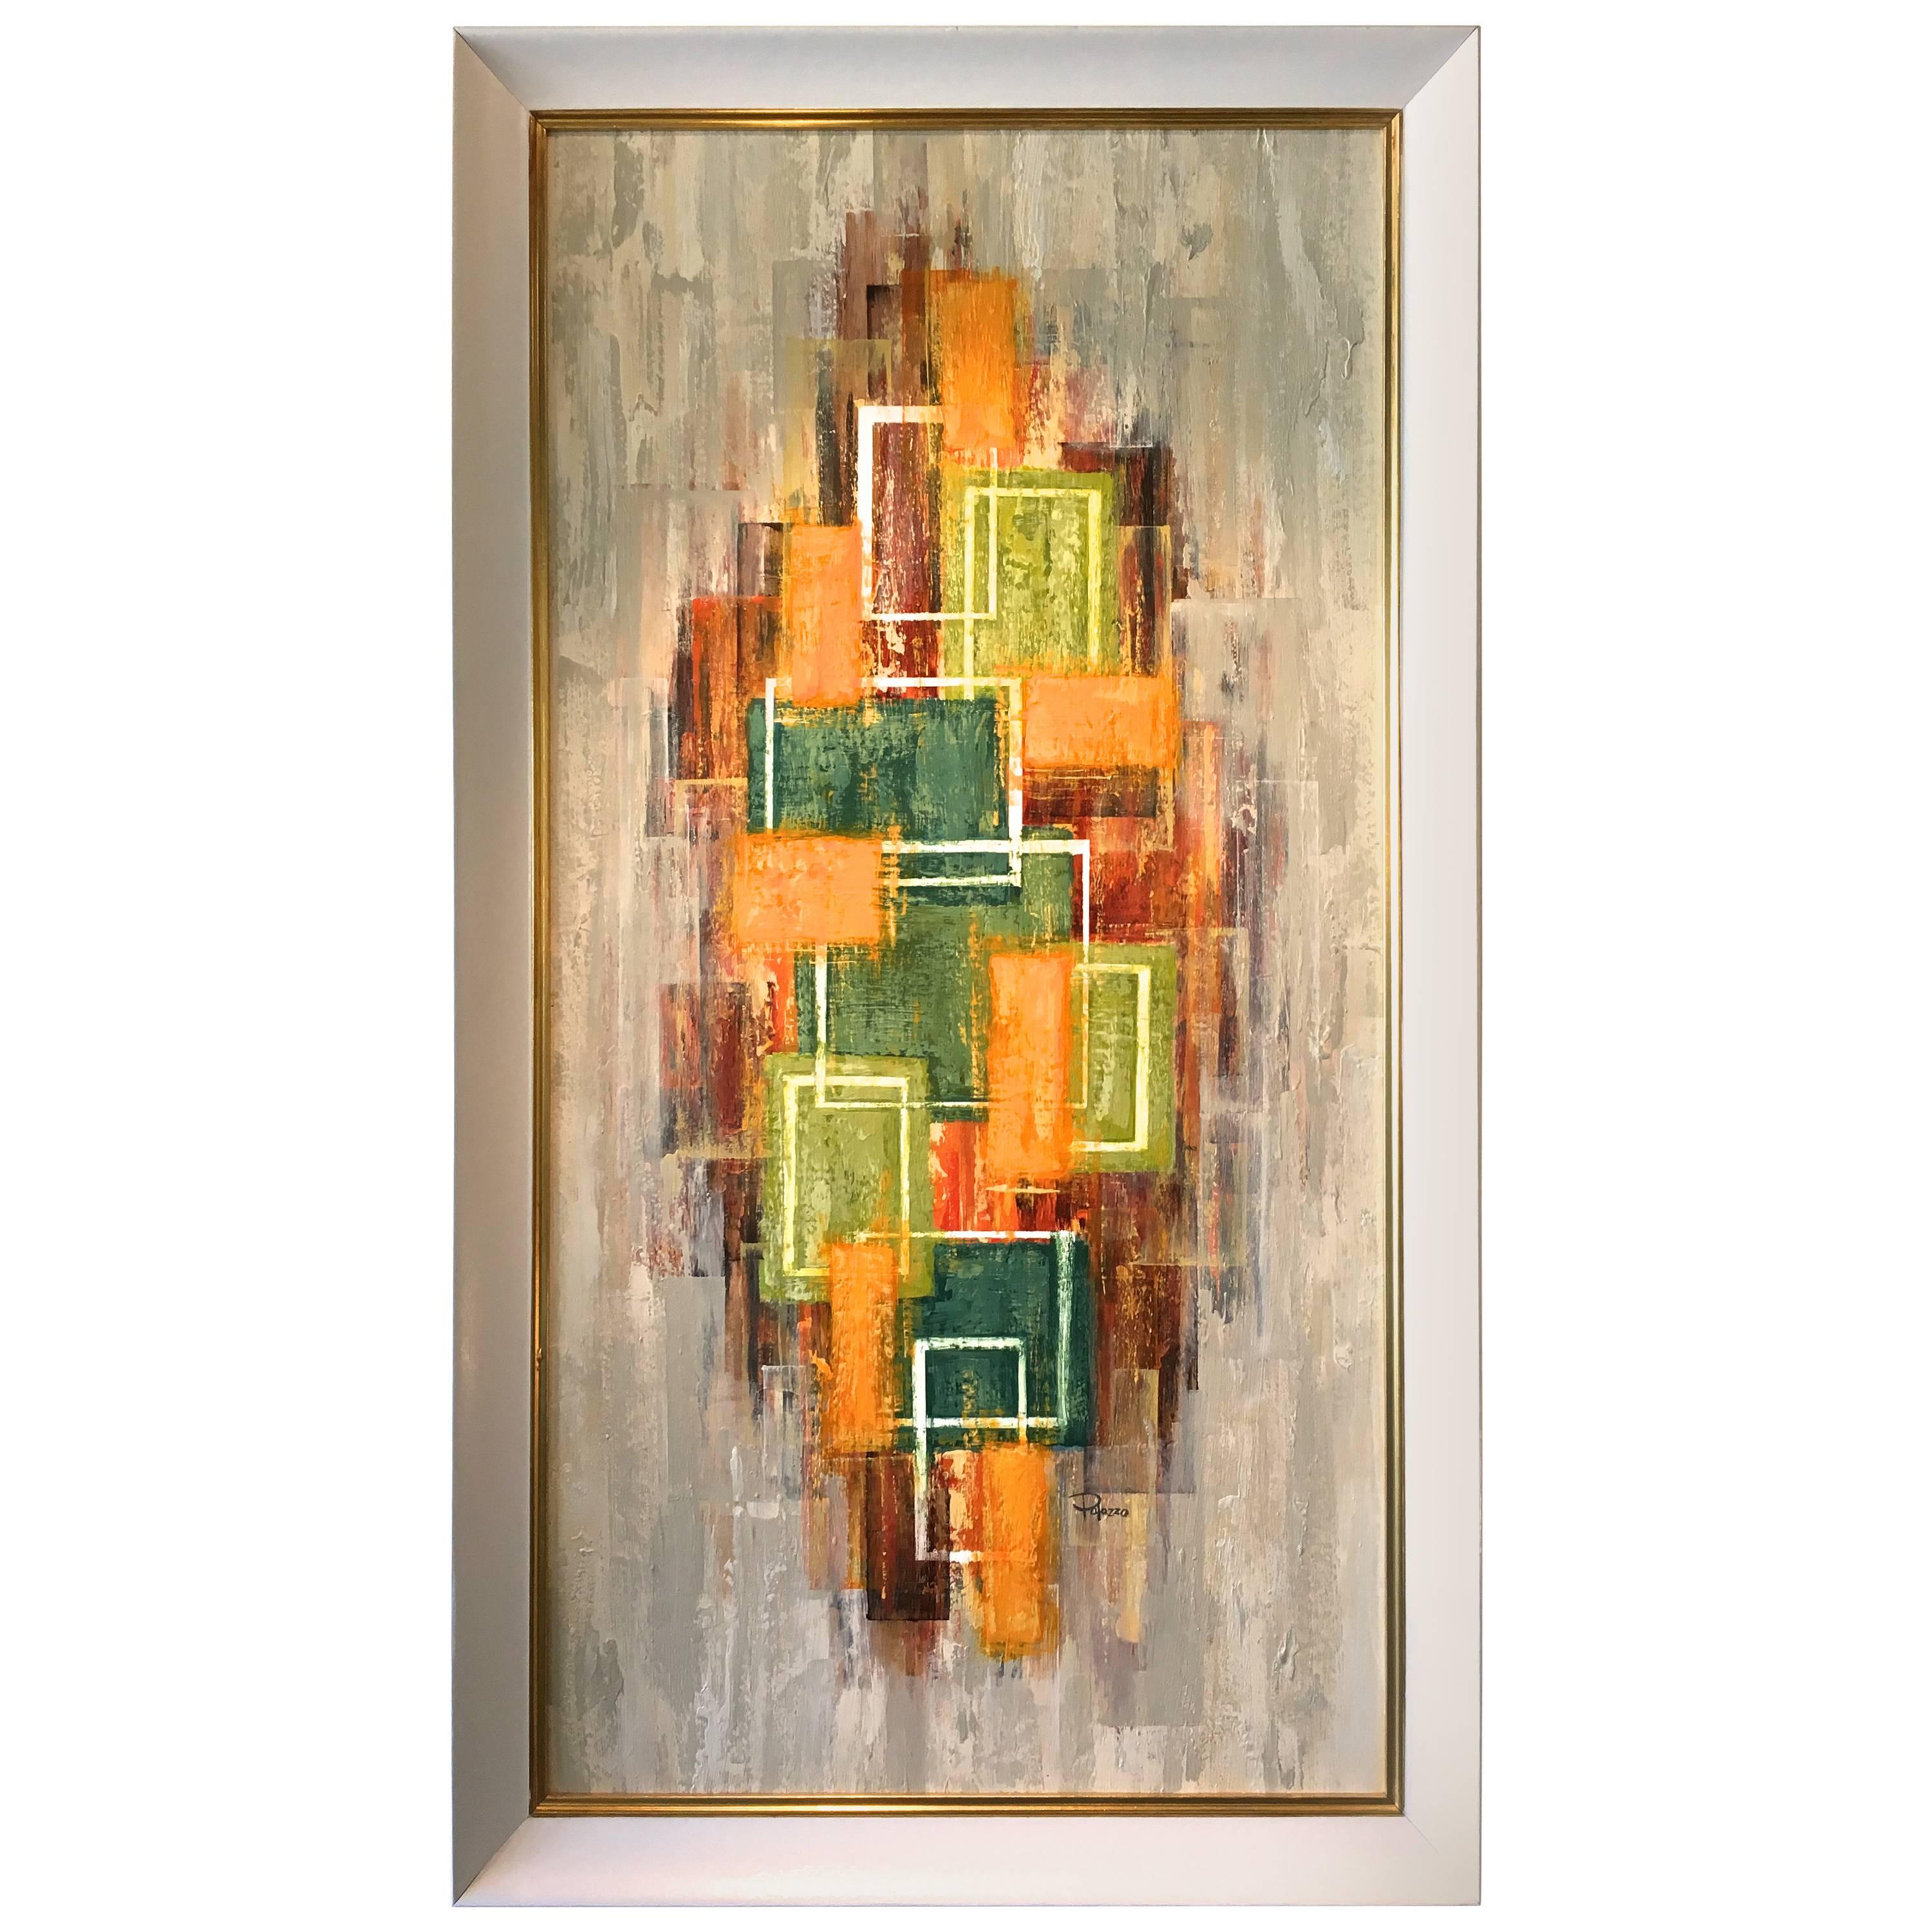 Vintage Inspired Original Acrylic Abstract by Bret Palazzo in Vintage Frame For Sale